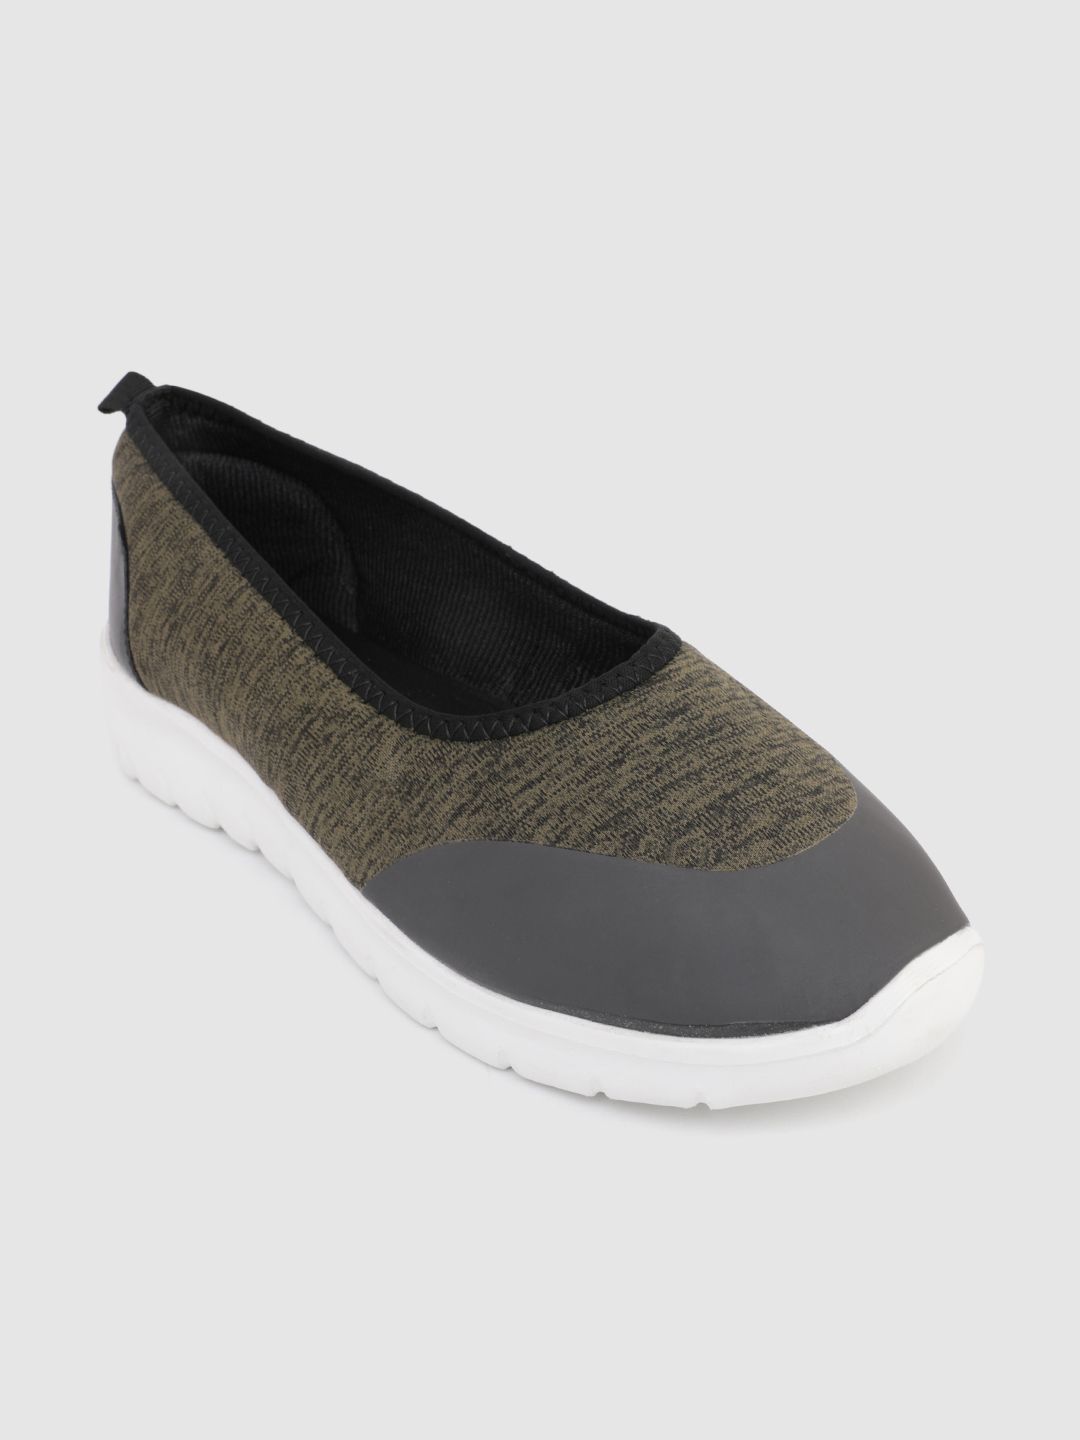 Roadster Women Olive Green Textured Slip-On Sneakers Price in India